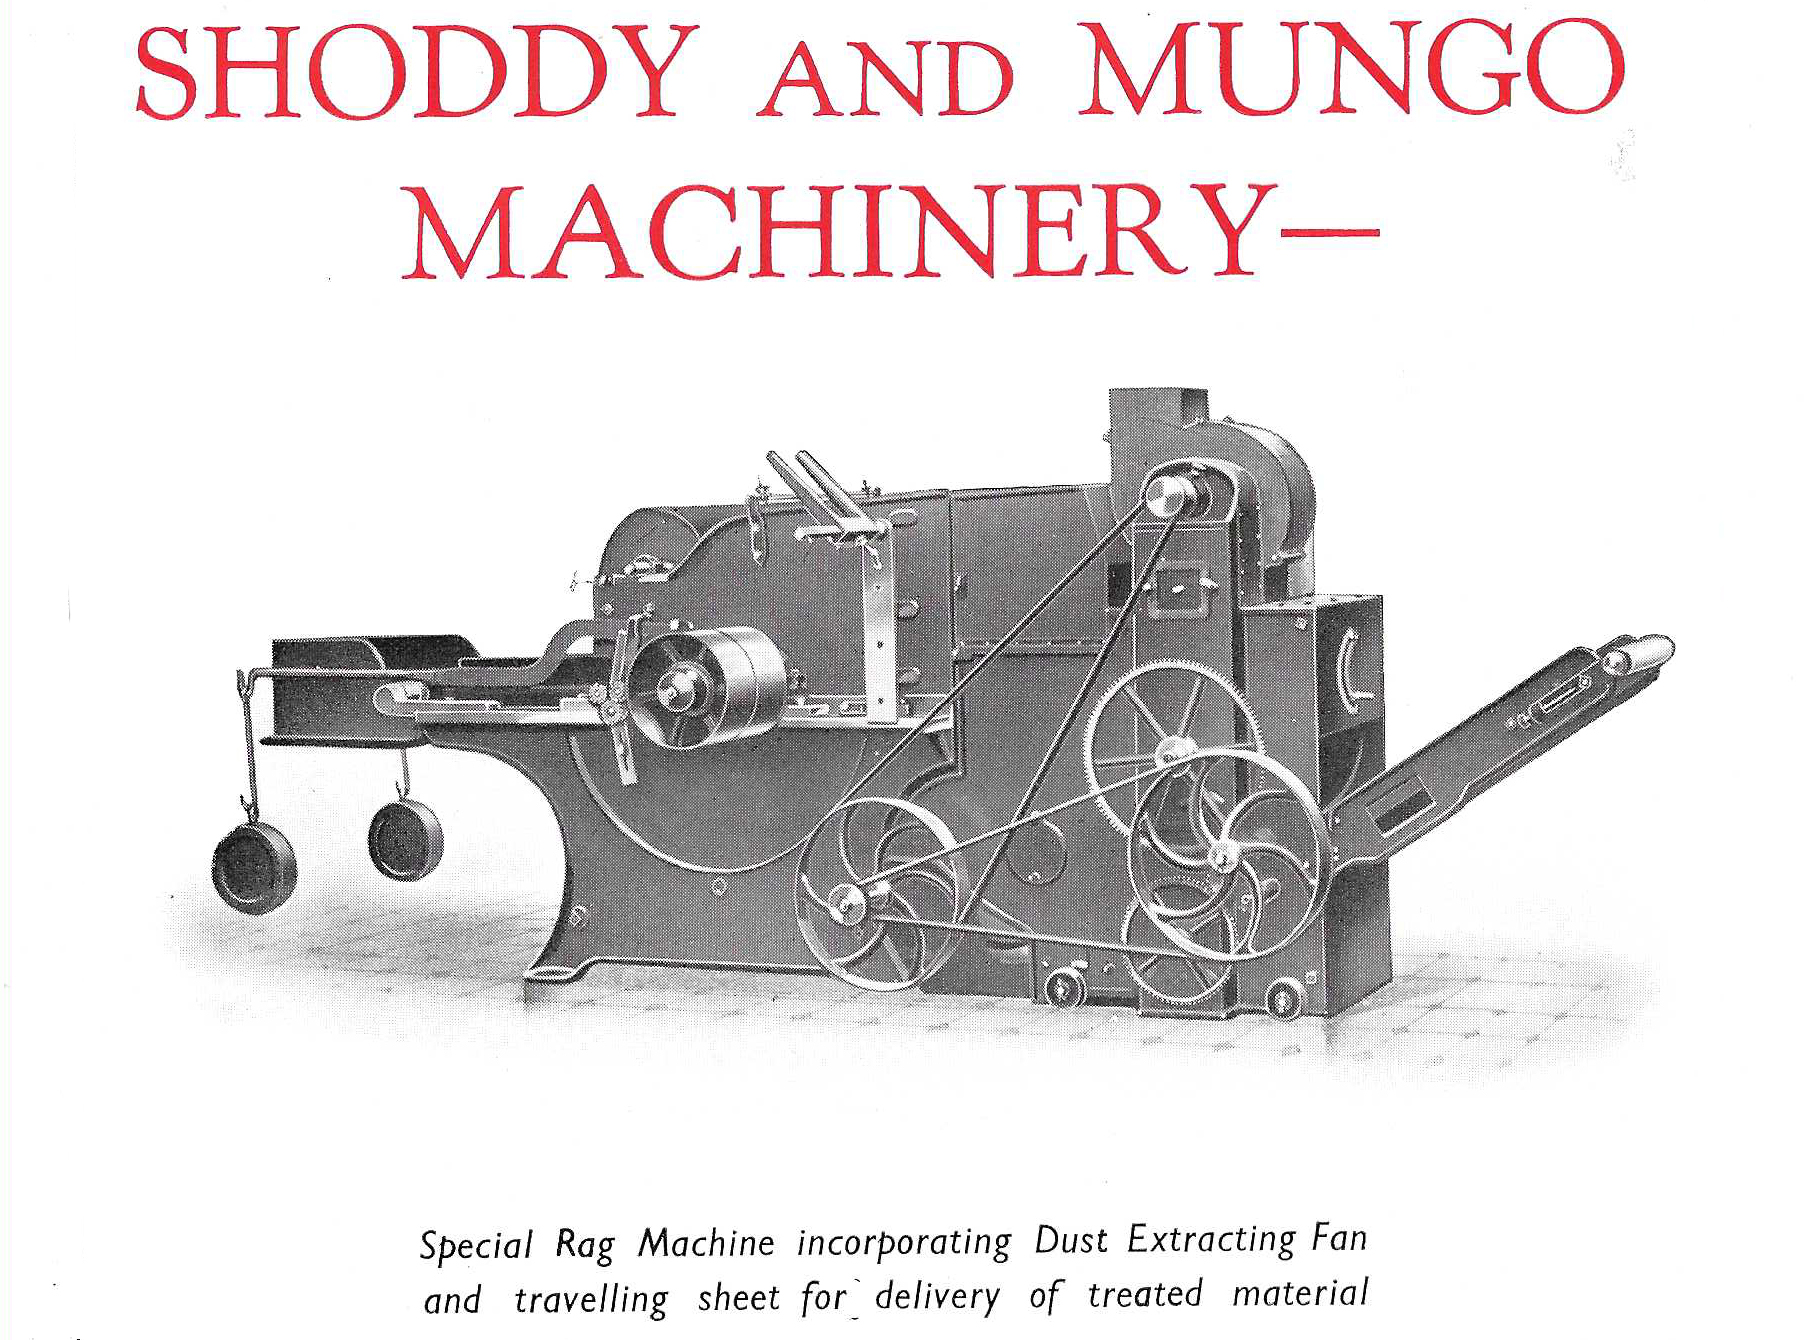 A gray scale image of a special rag machine with a title Shoddy and Mungo Machinery